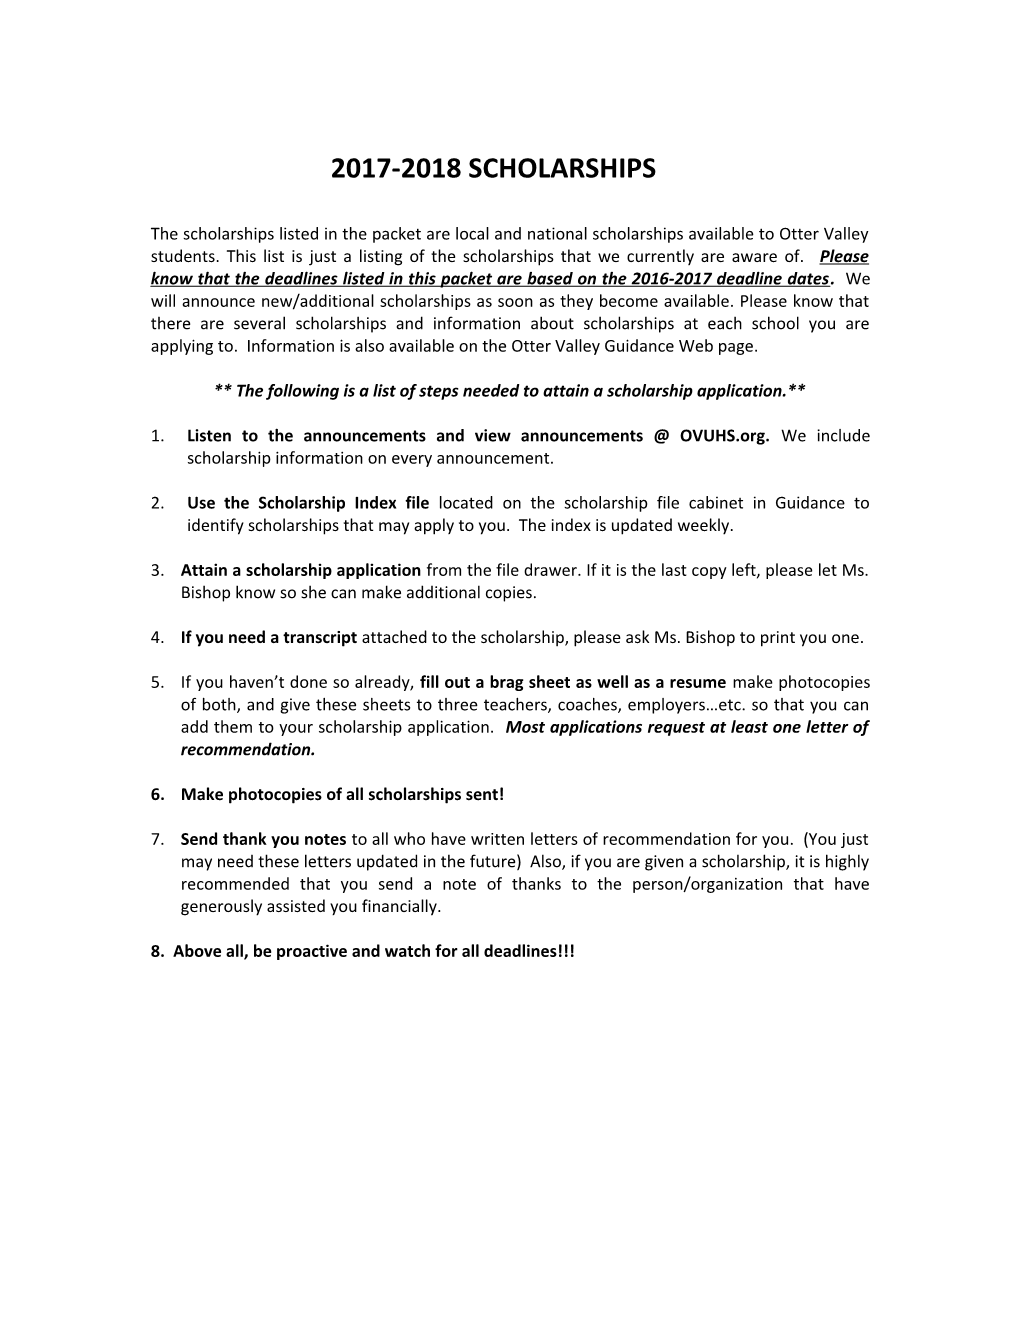 The Following Is a List of Steps Needed to Attain a Scholarship Application